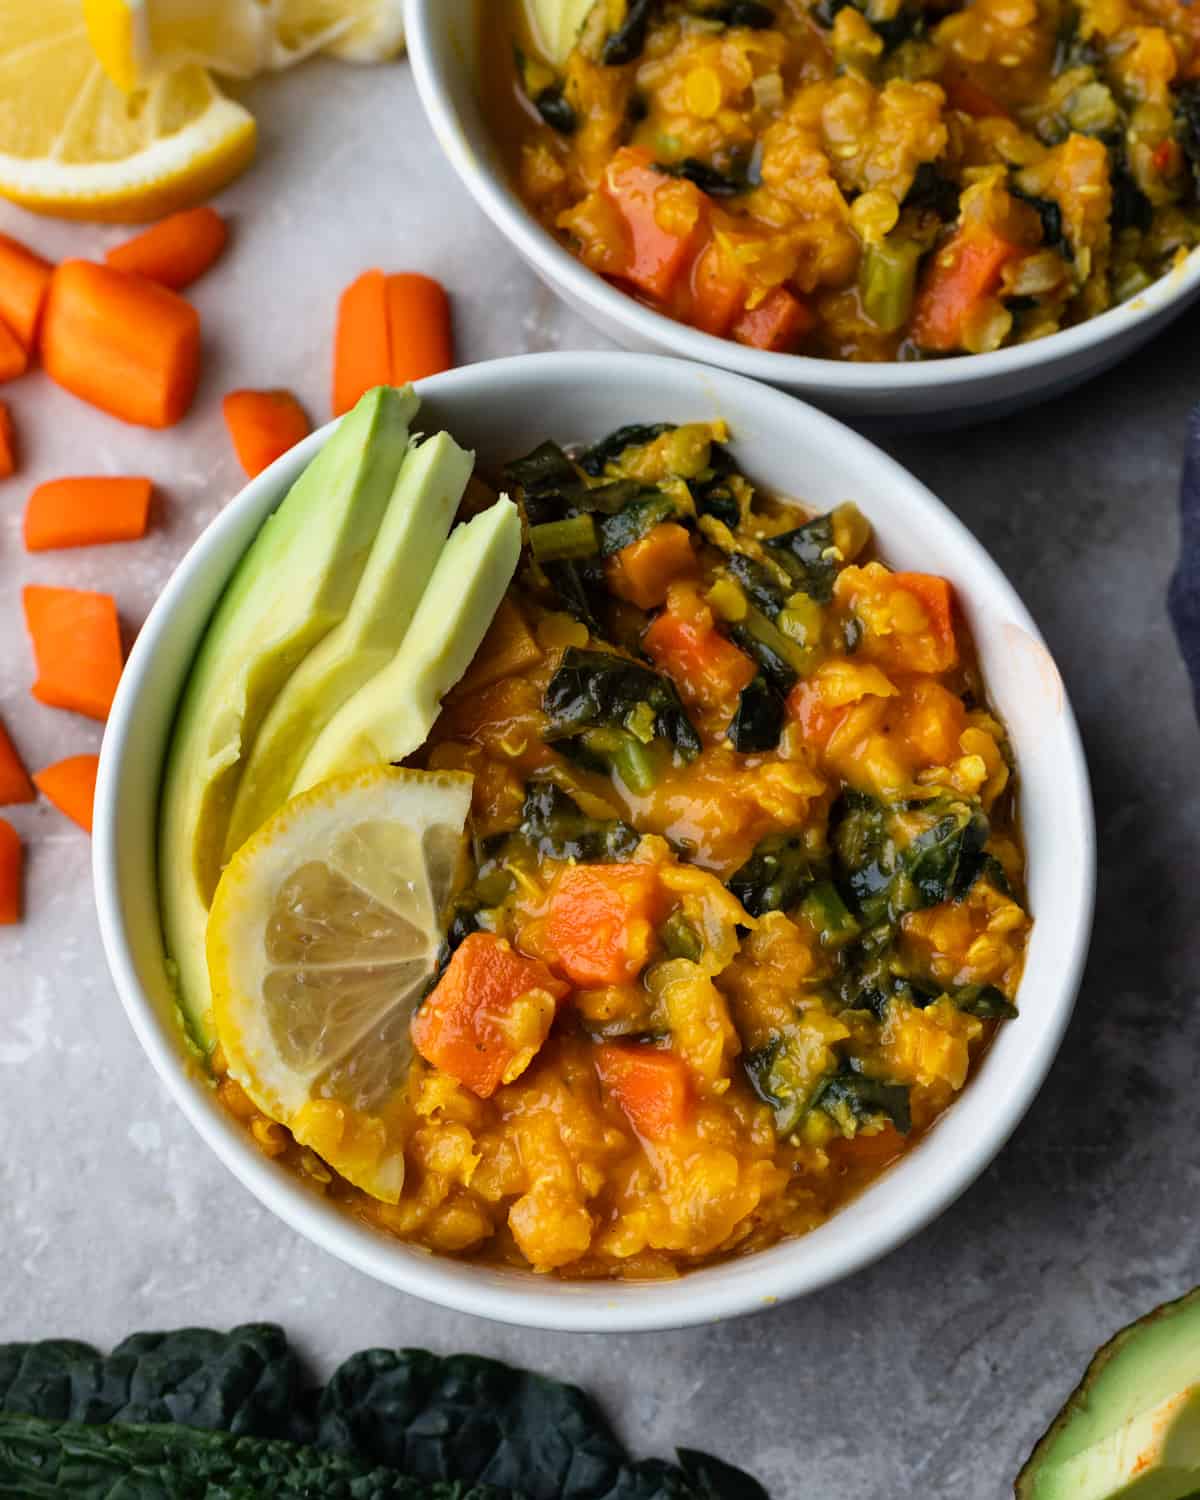 Close up image of 2 bowls full of a carrot and kale red lentil stew. The recipe is keto-friendly and made in the instant pot. The stew is topped with fresh lemon and avocado.